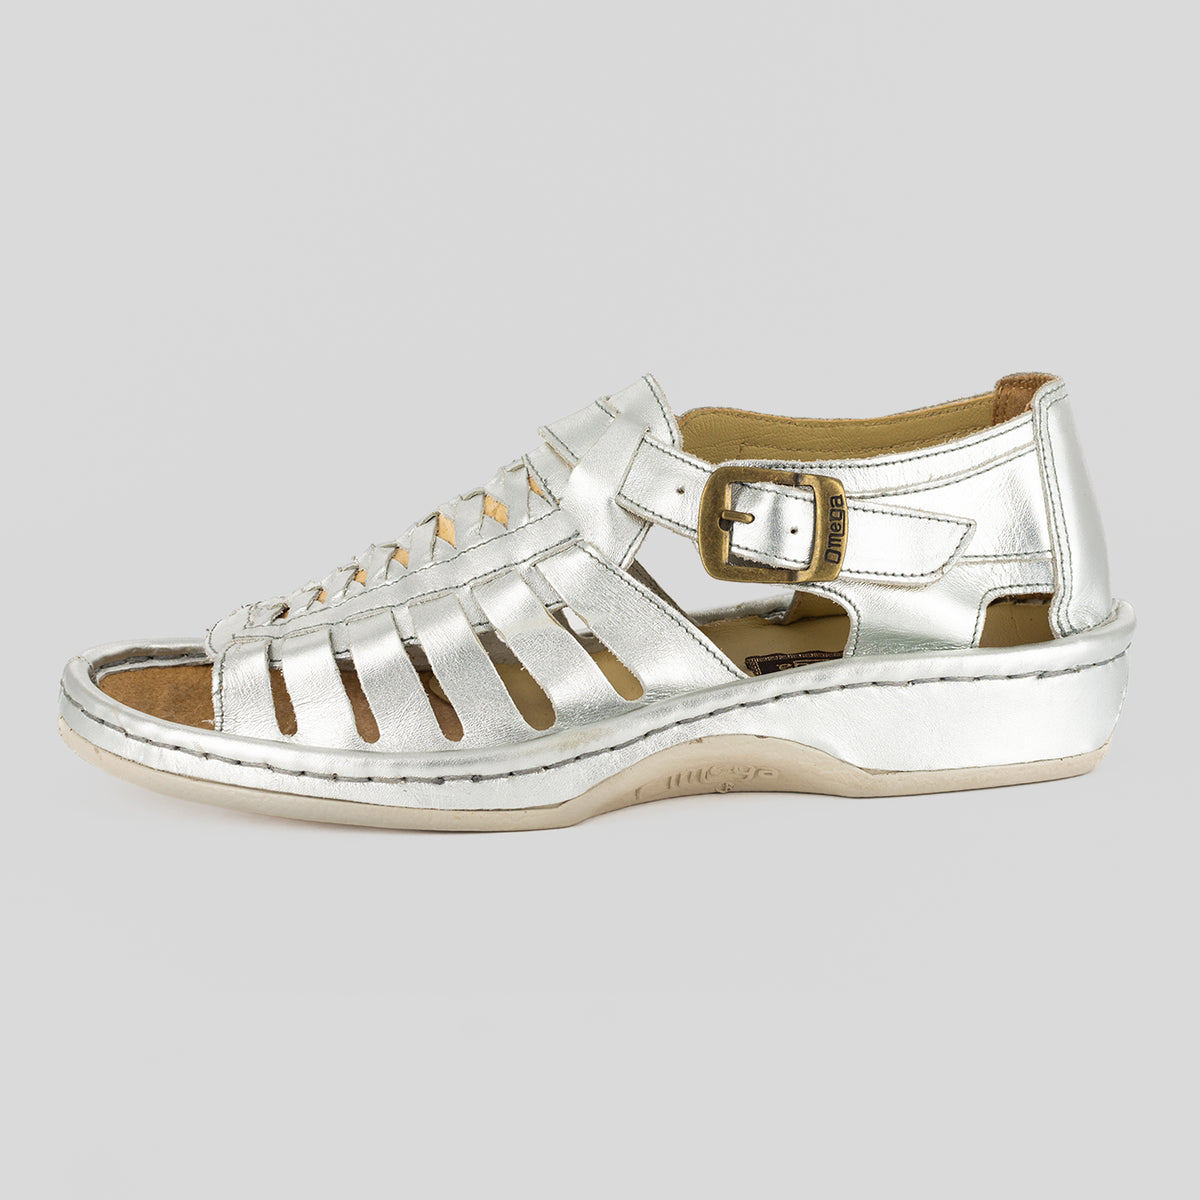 Kgosi : Leather Sandal in Silver Prime Leather